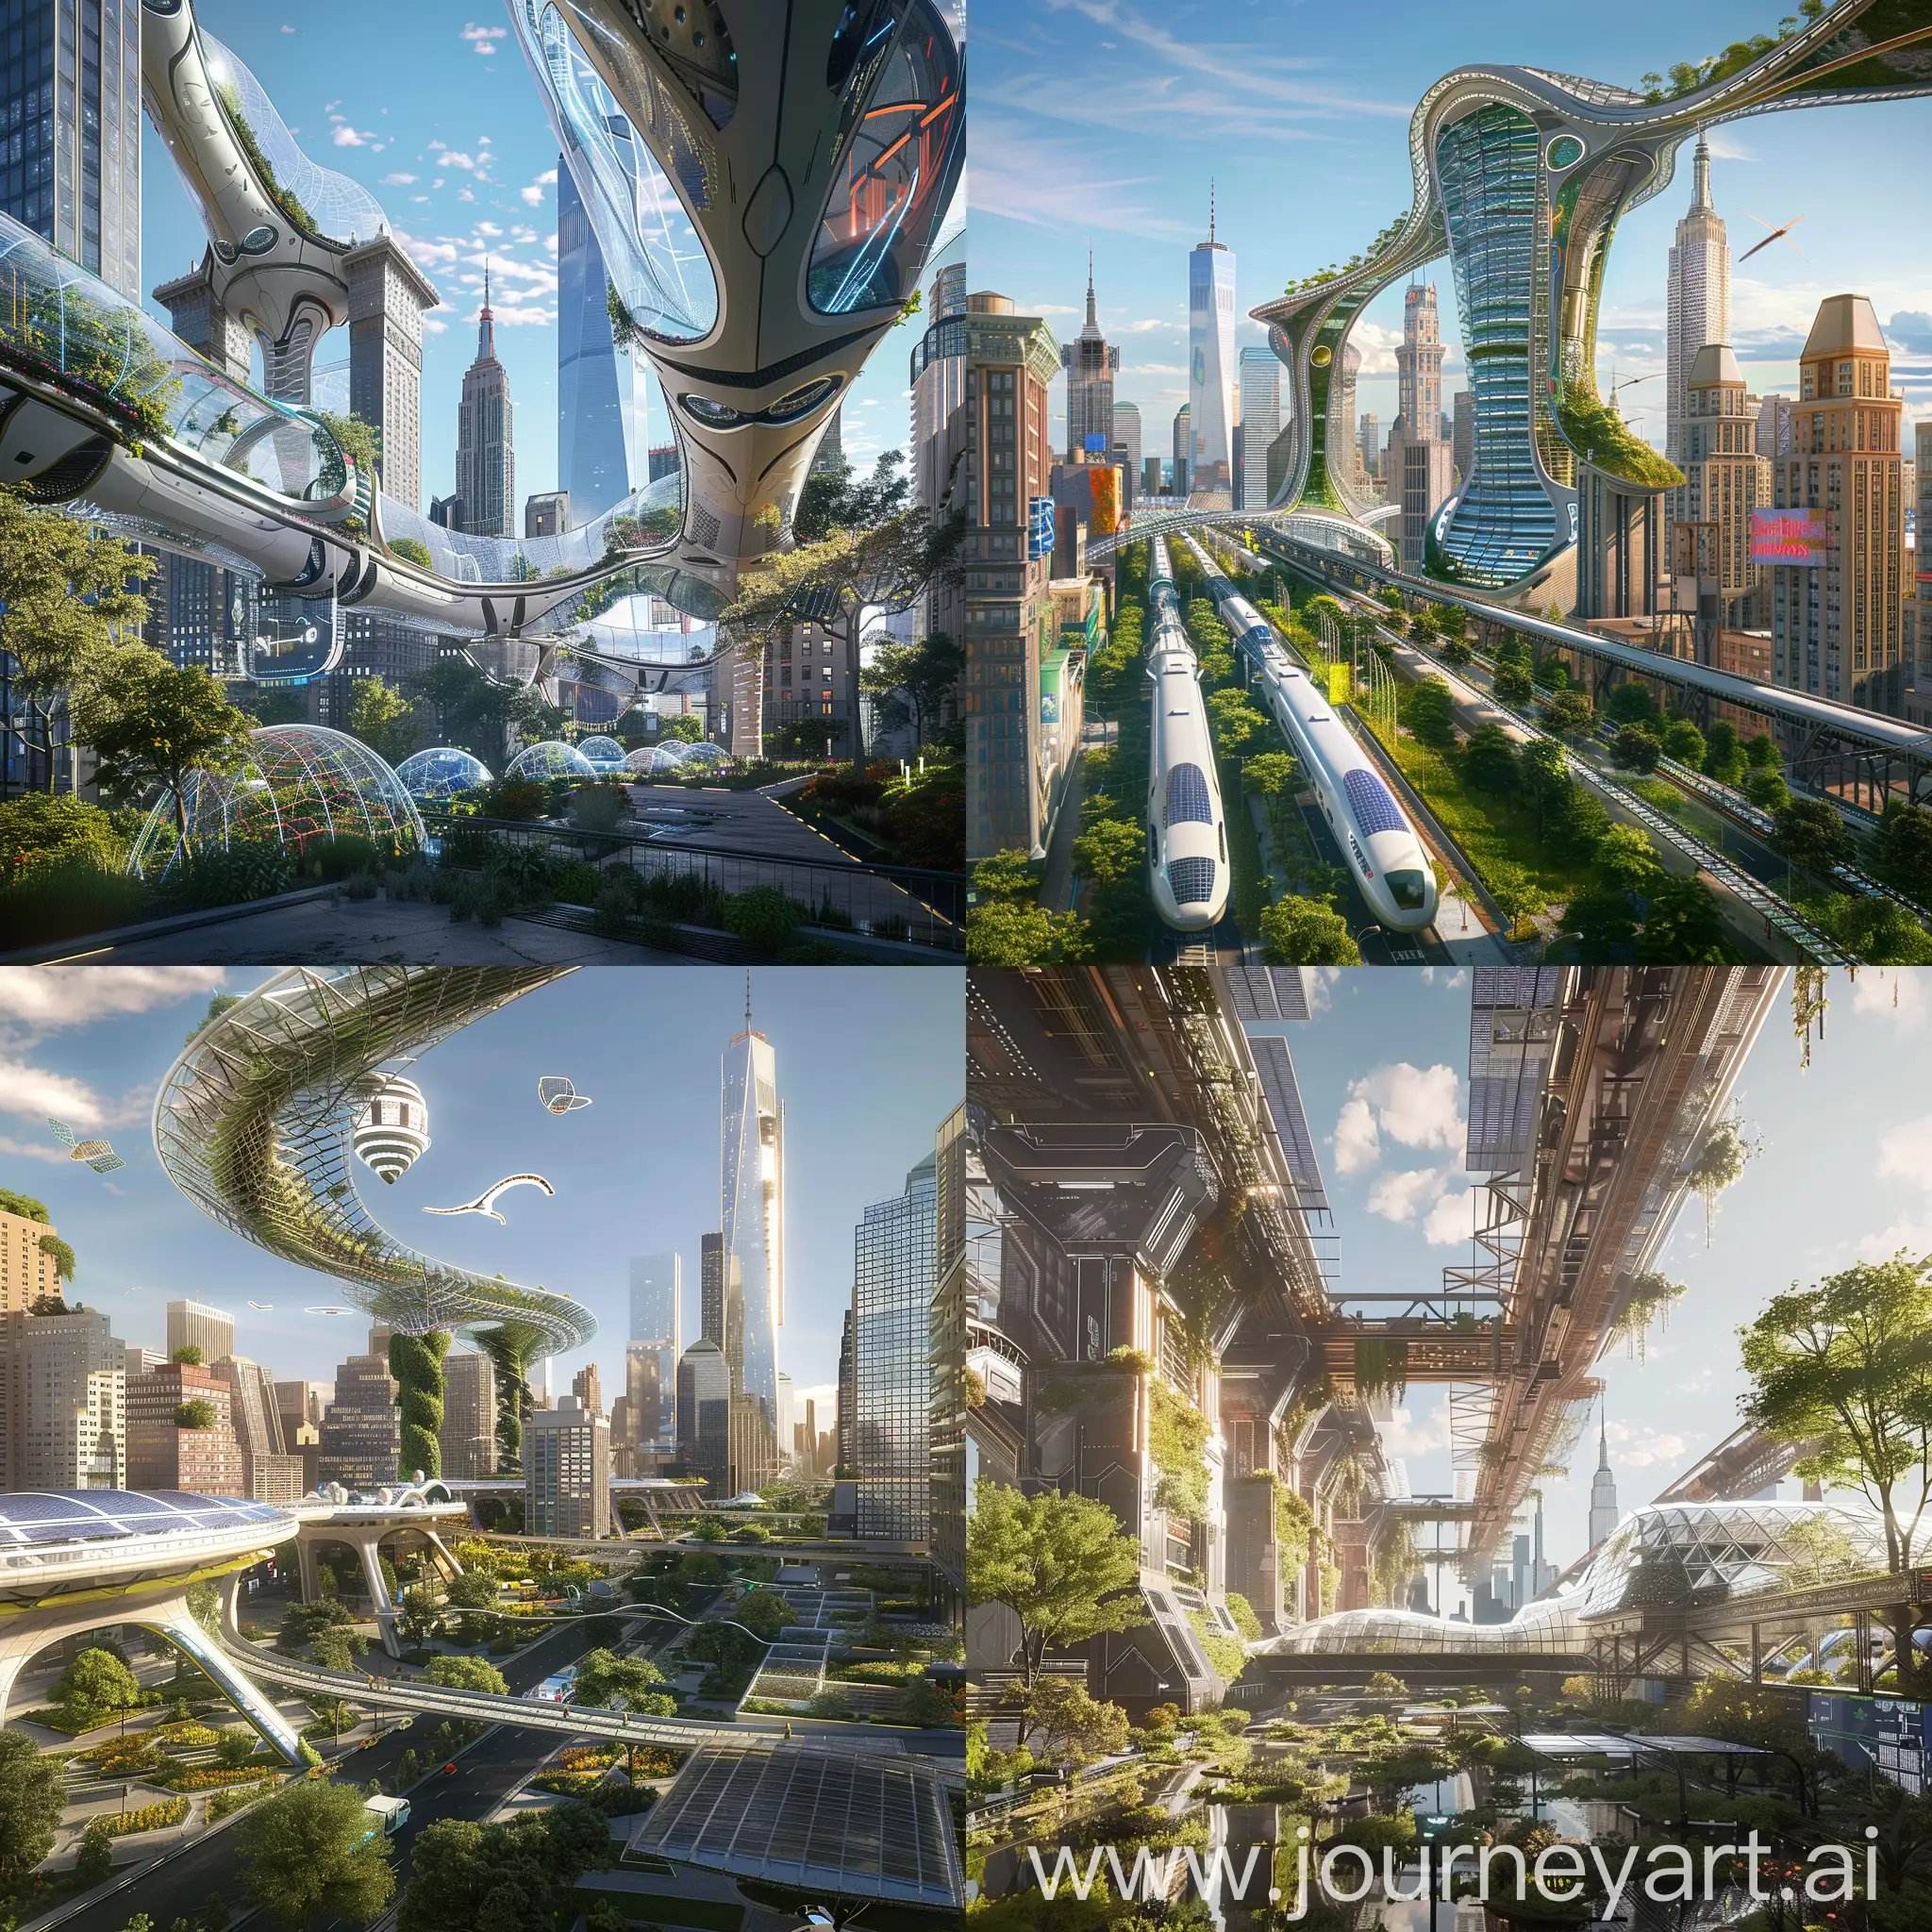 Futuristic-New-York-City-Augmented-Reality-Integration-Vertical-Farming-and-Renewable-Energy